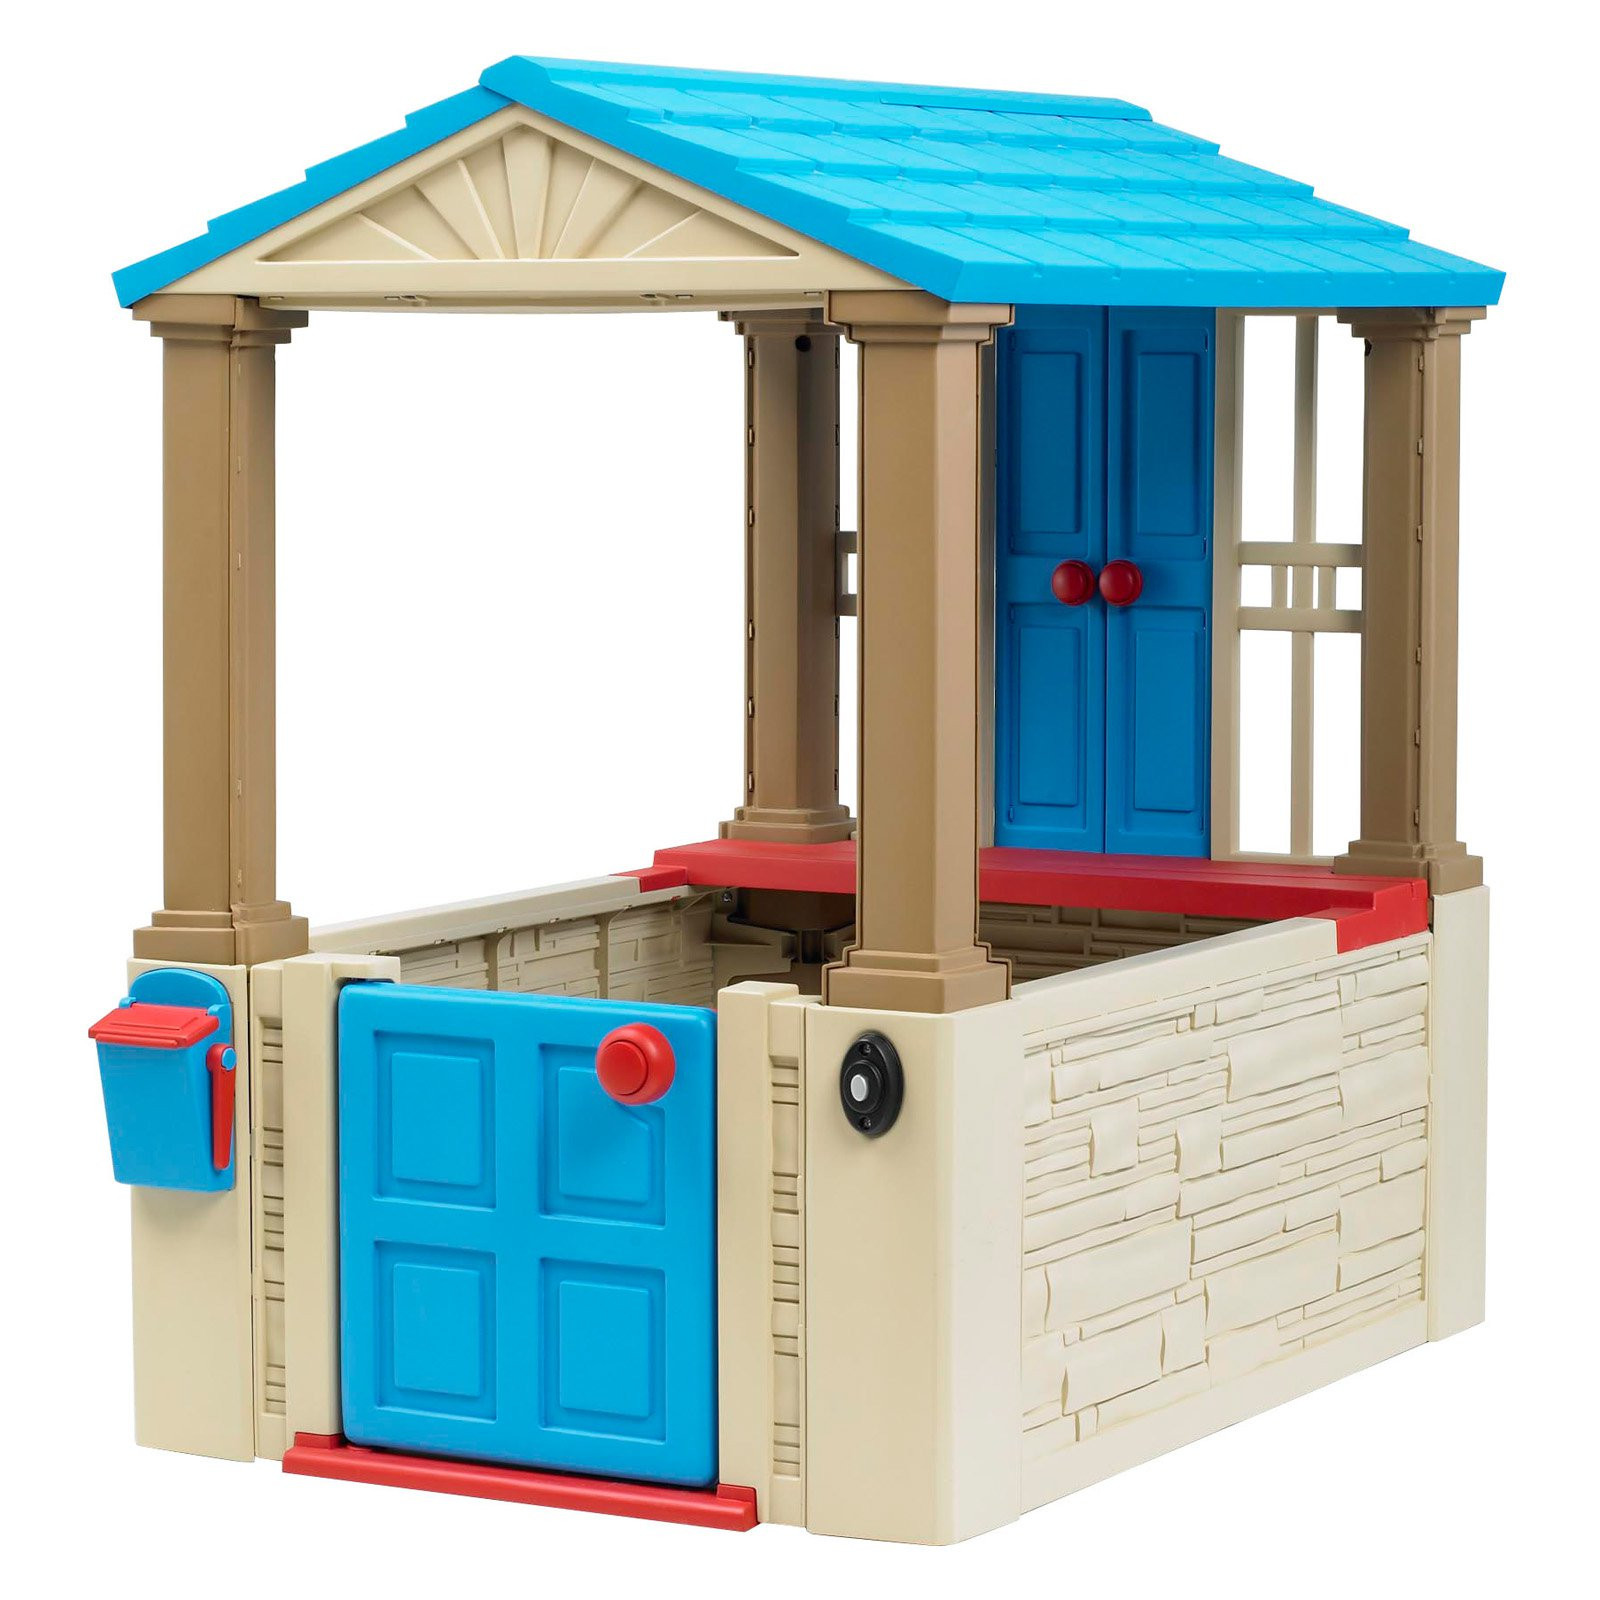 Kids Outdoor Plastic Playhouses
 American Plastic Toys My First Playhouse Indoor